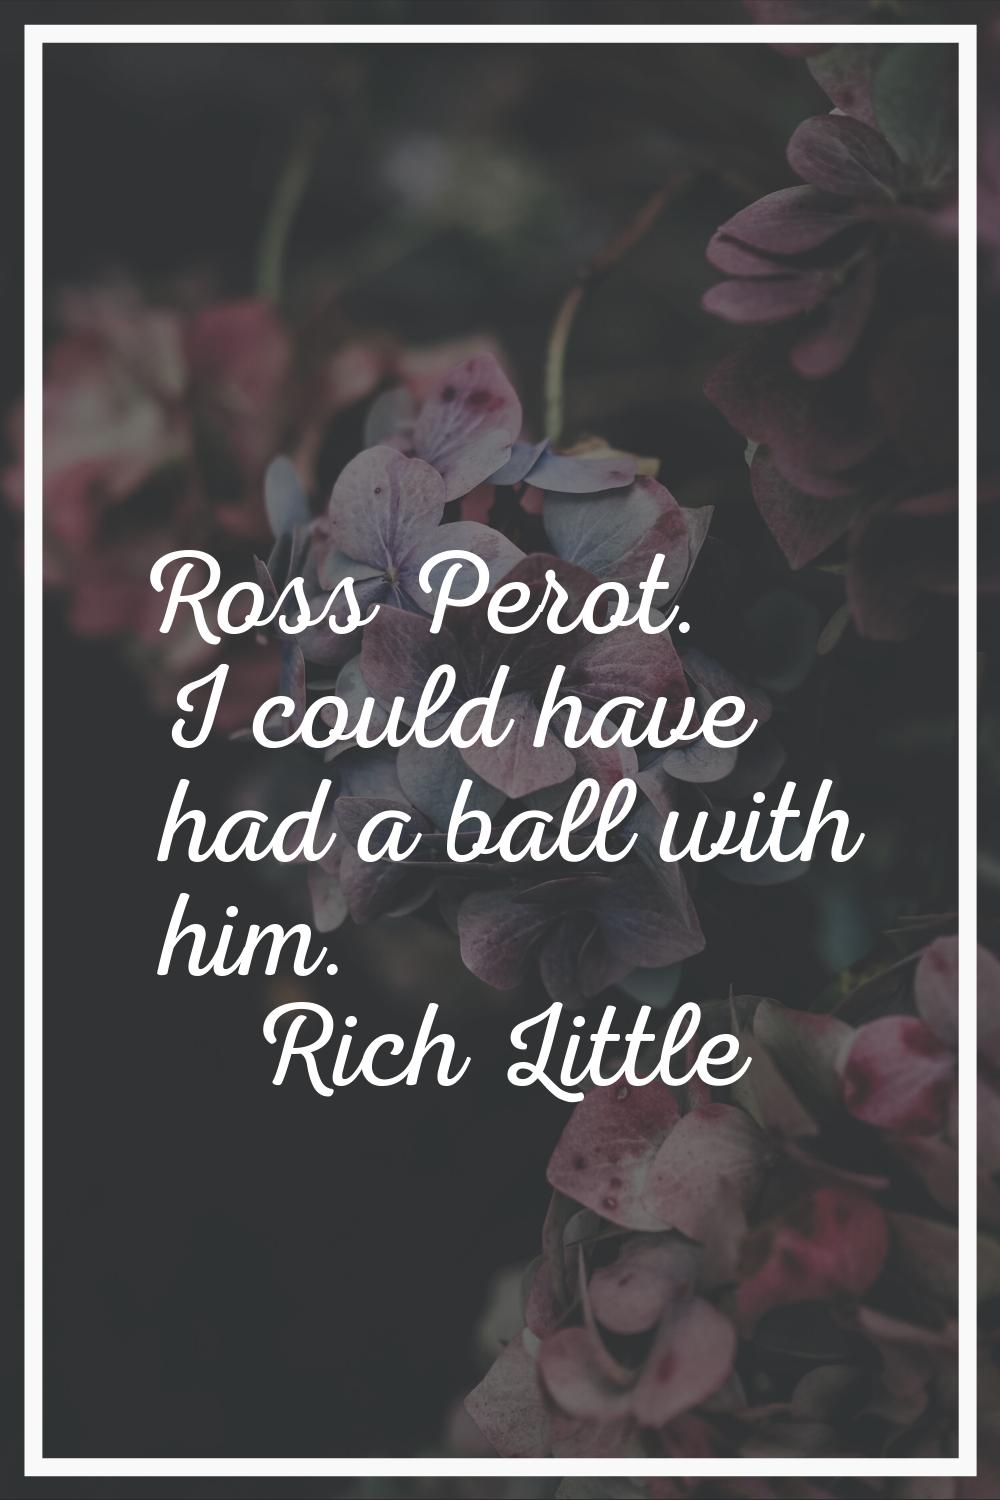 Ross Perot. I could have had a ball with him.